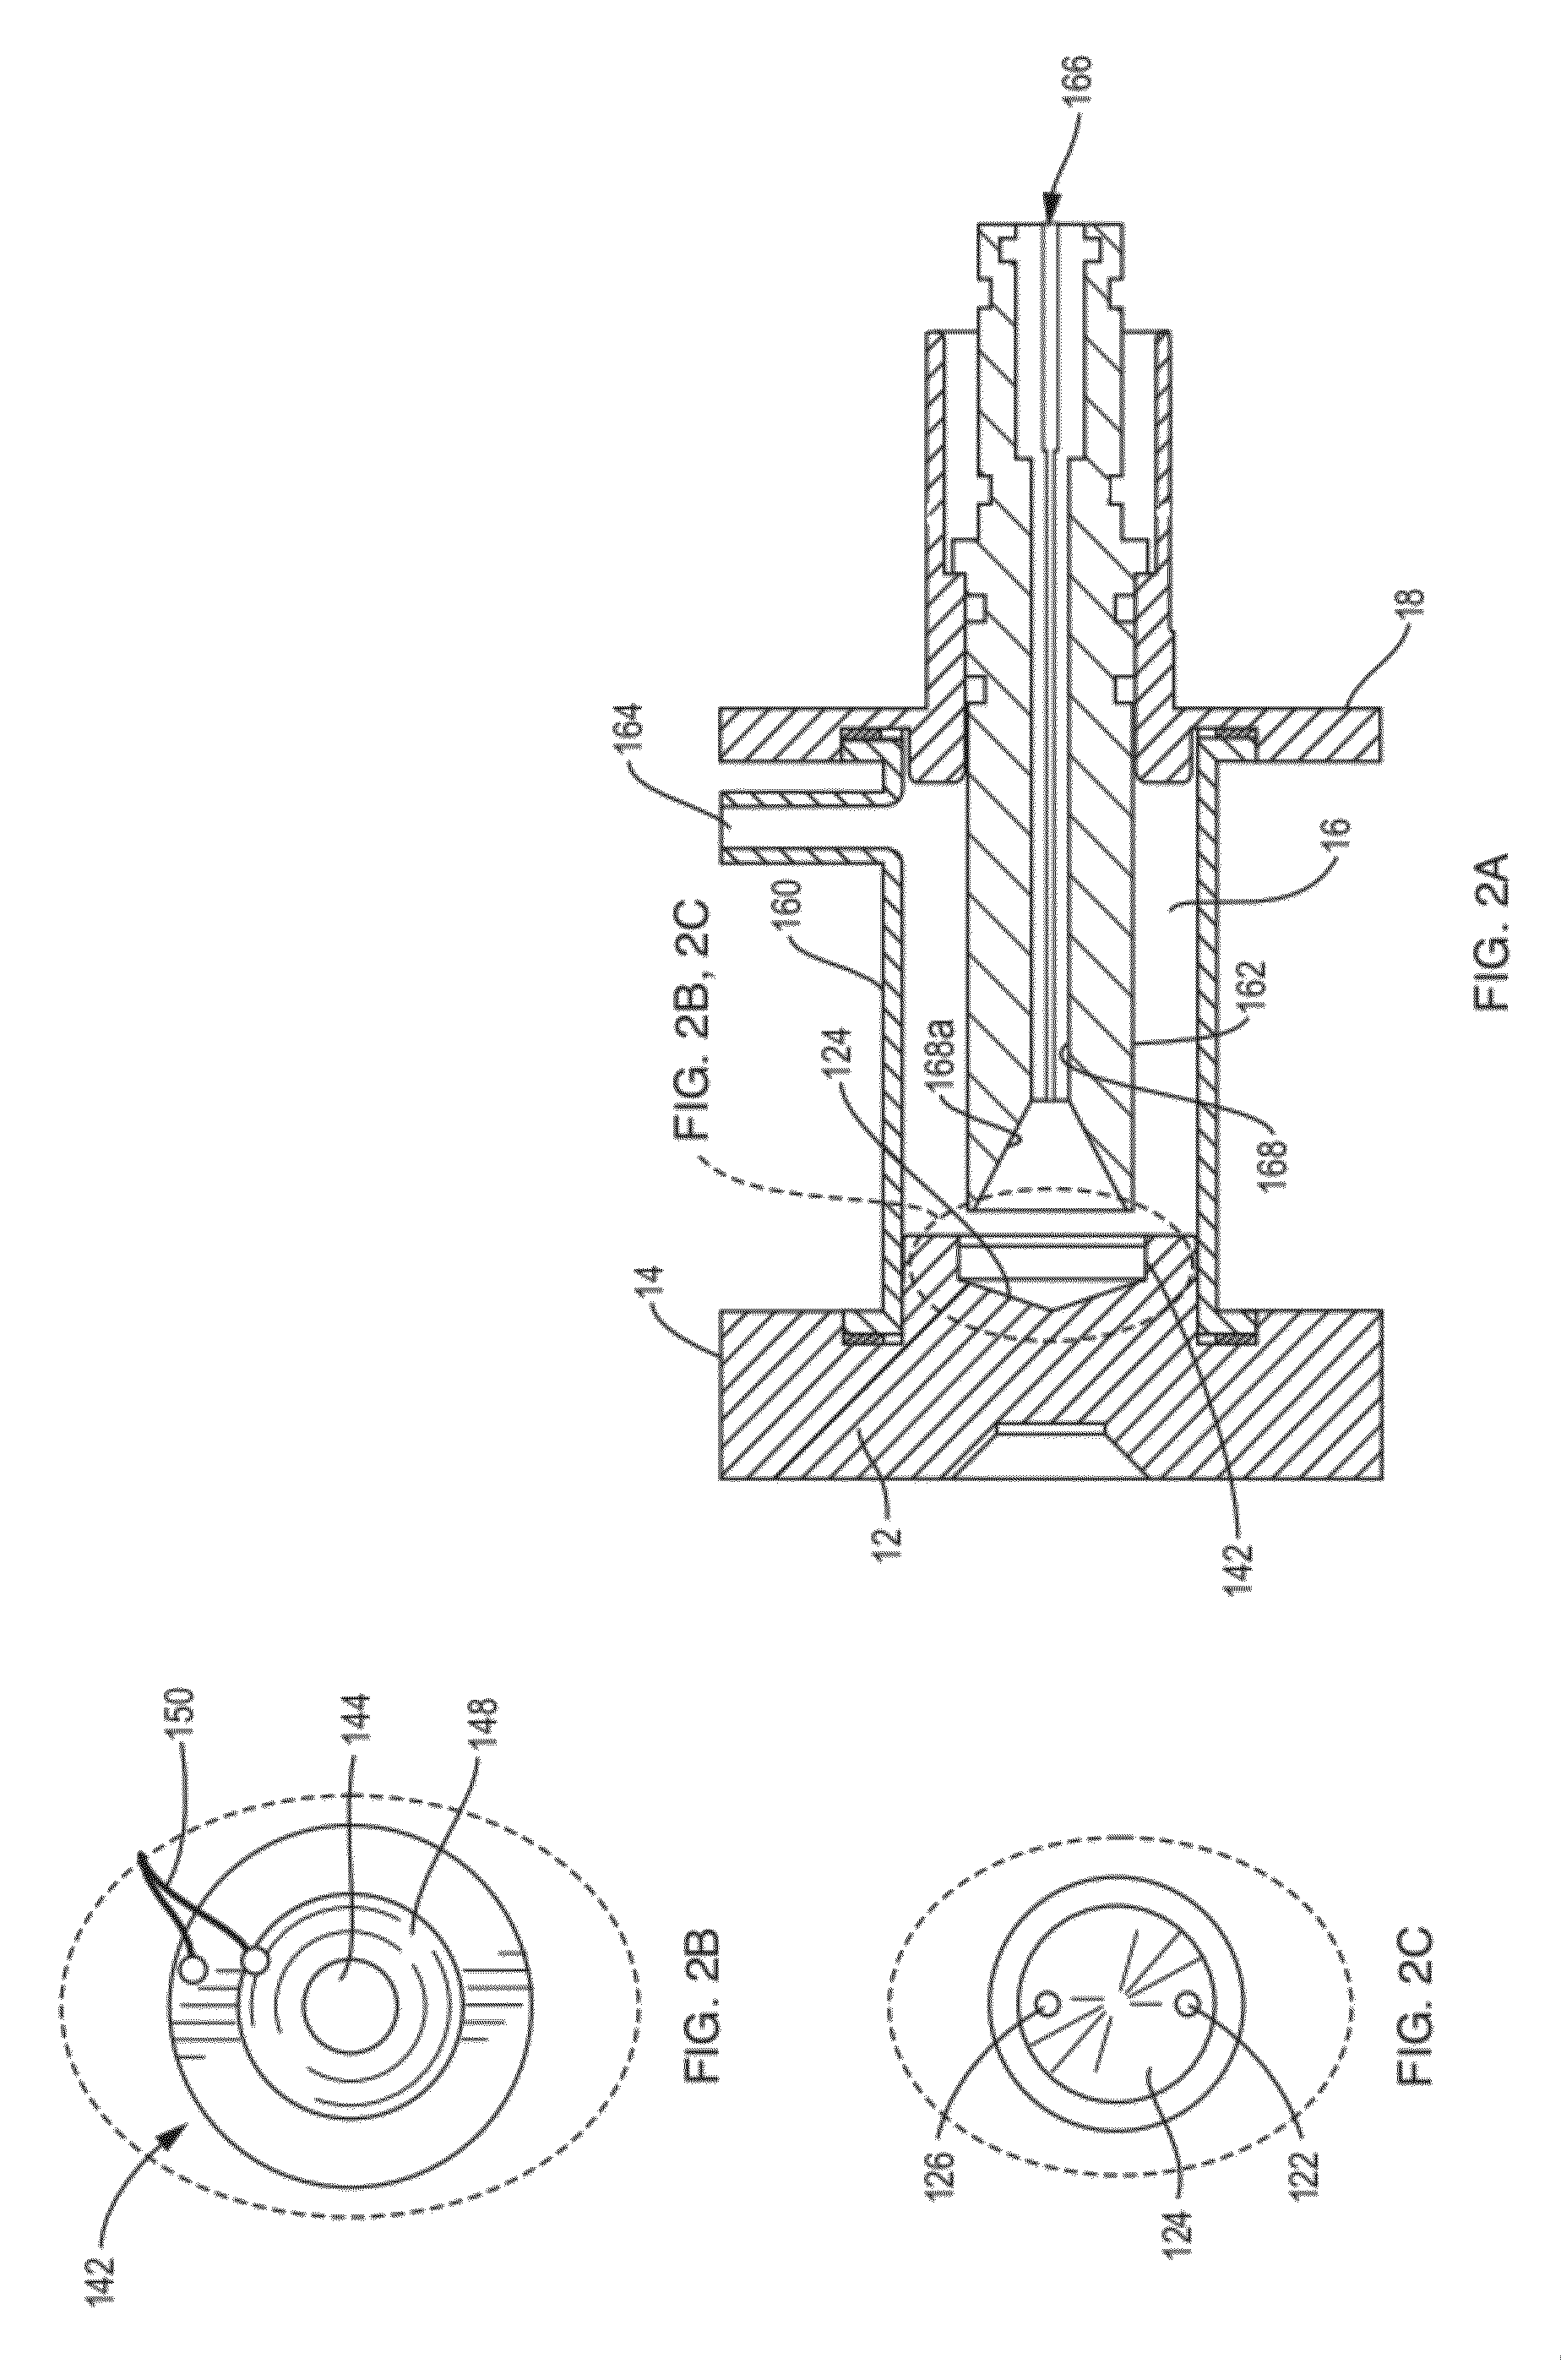 Sample introduction method and system for atomic spectrometry